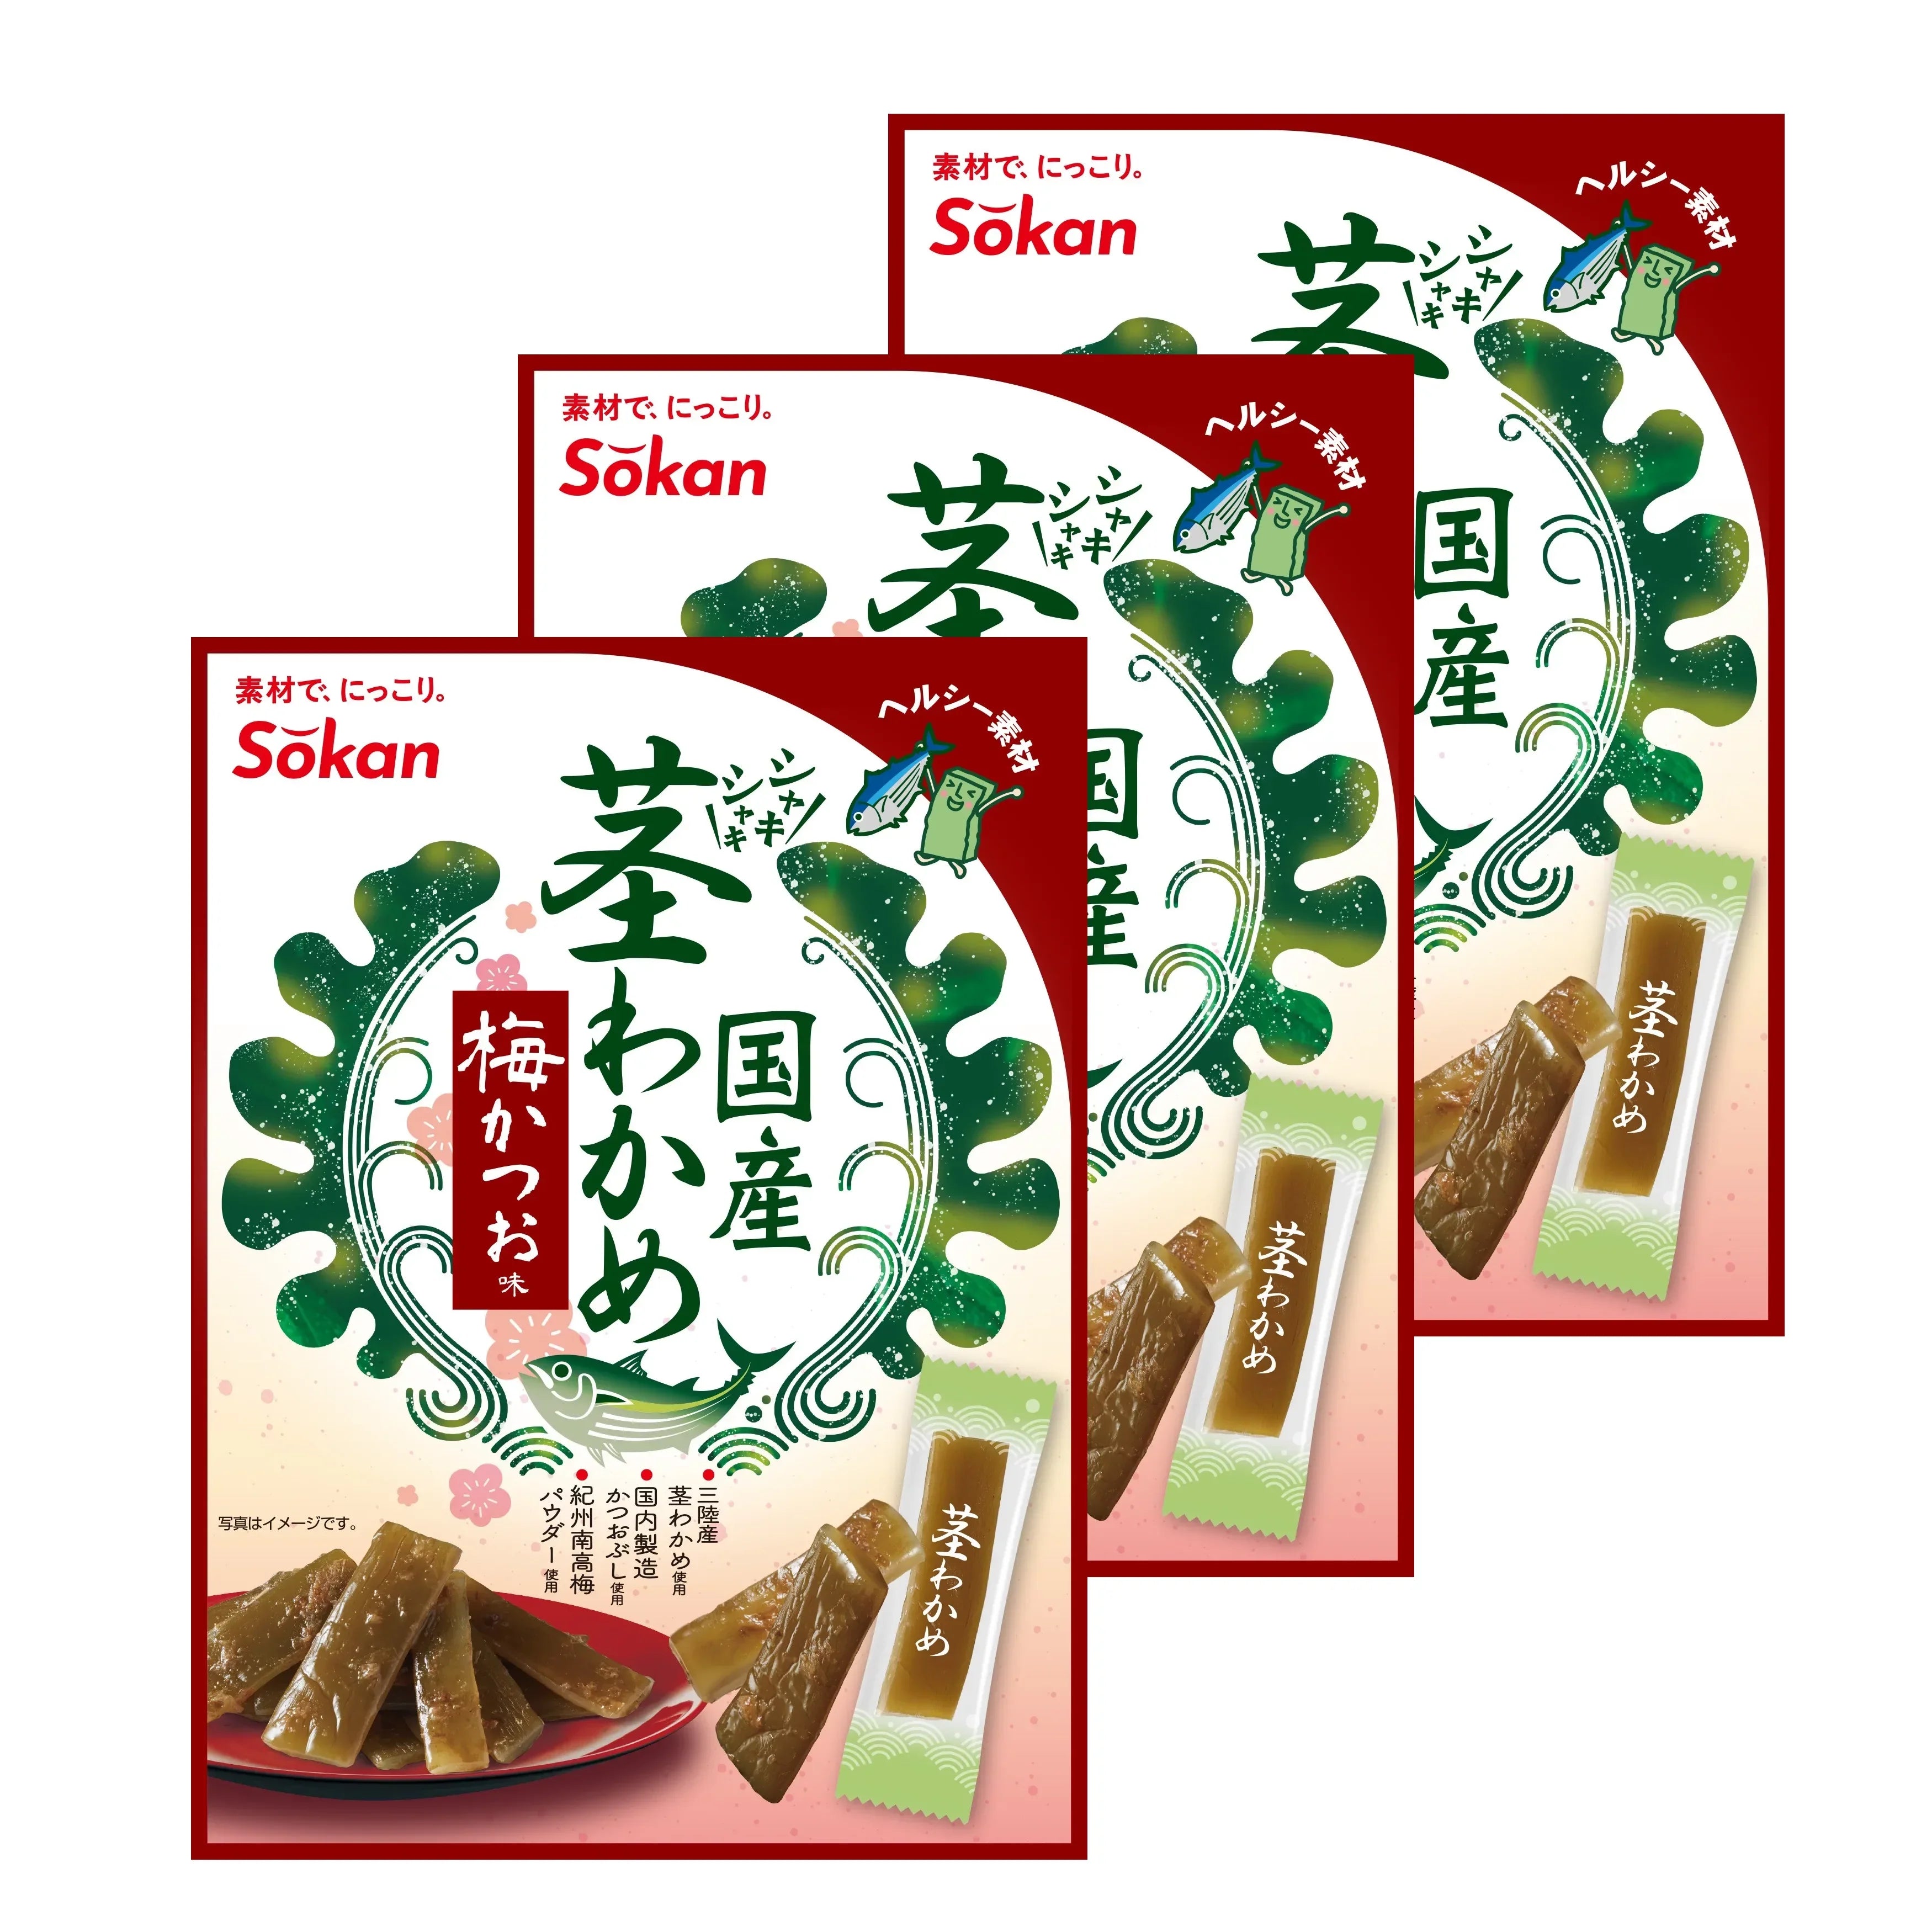 Ume Plum & Bonito Flavored Wakame Stems Seaweed Snack 63g (Pack of 3)